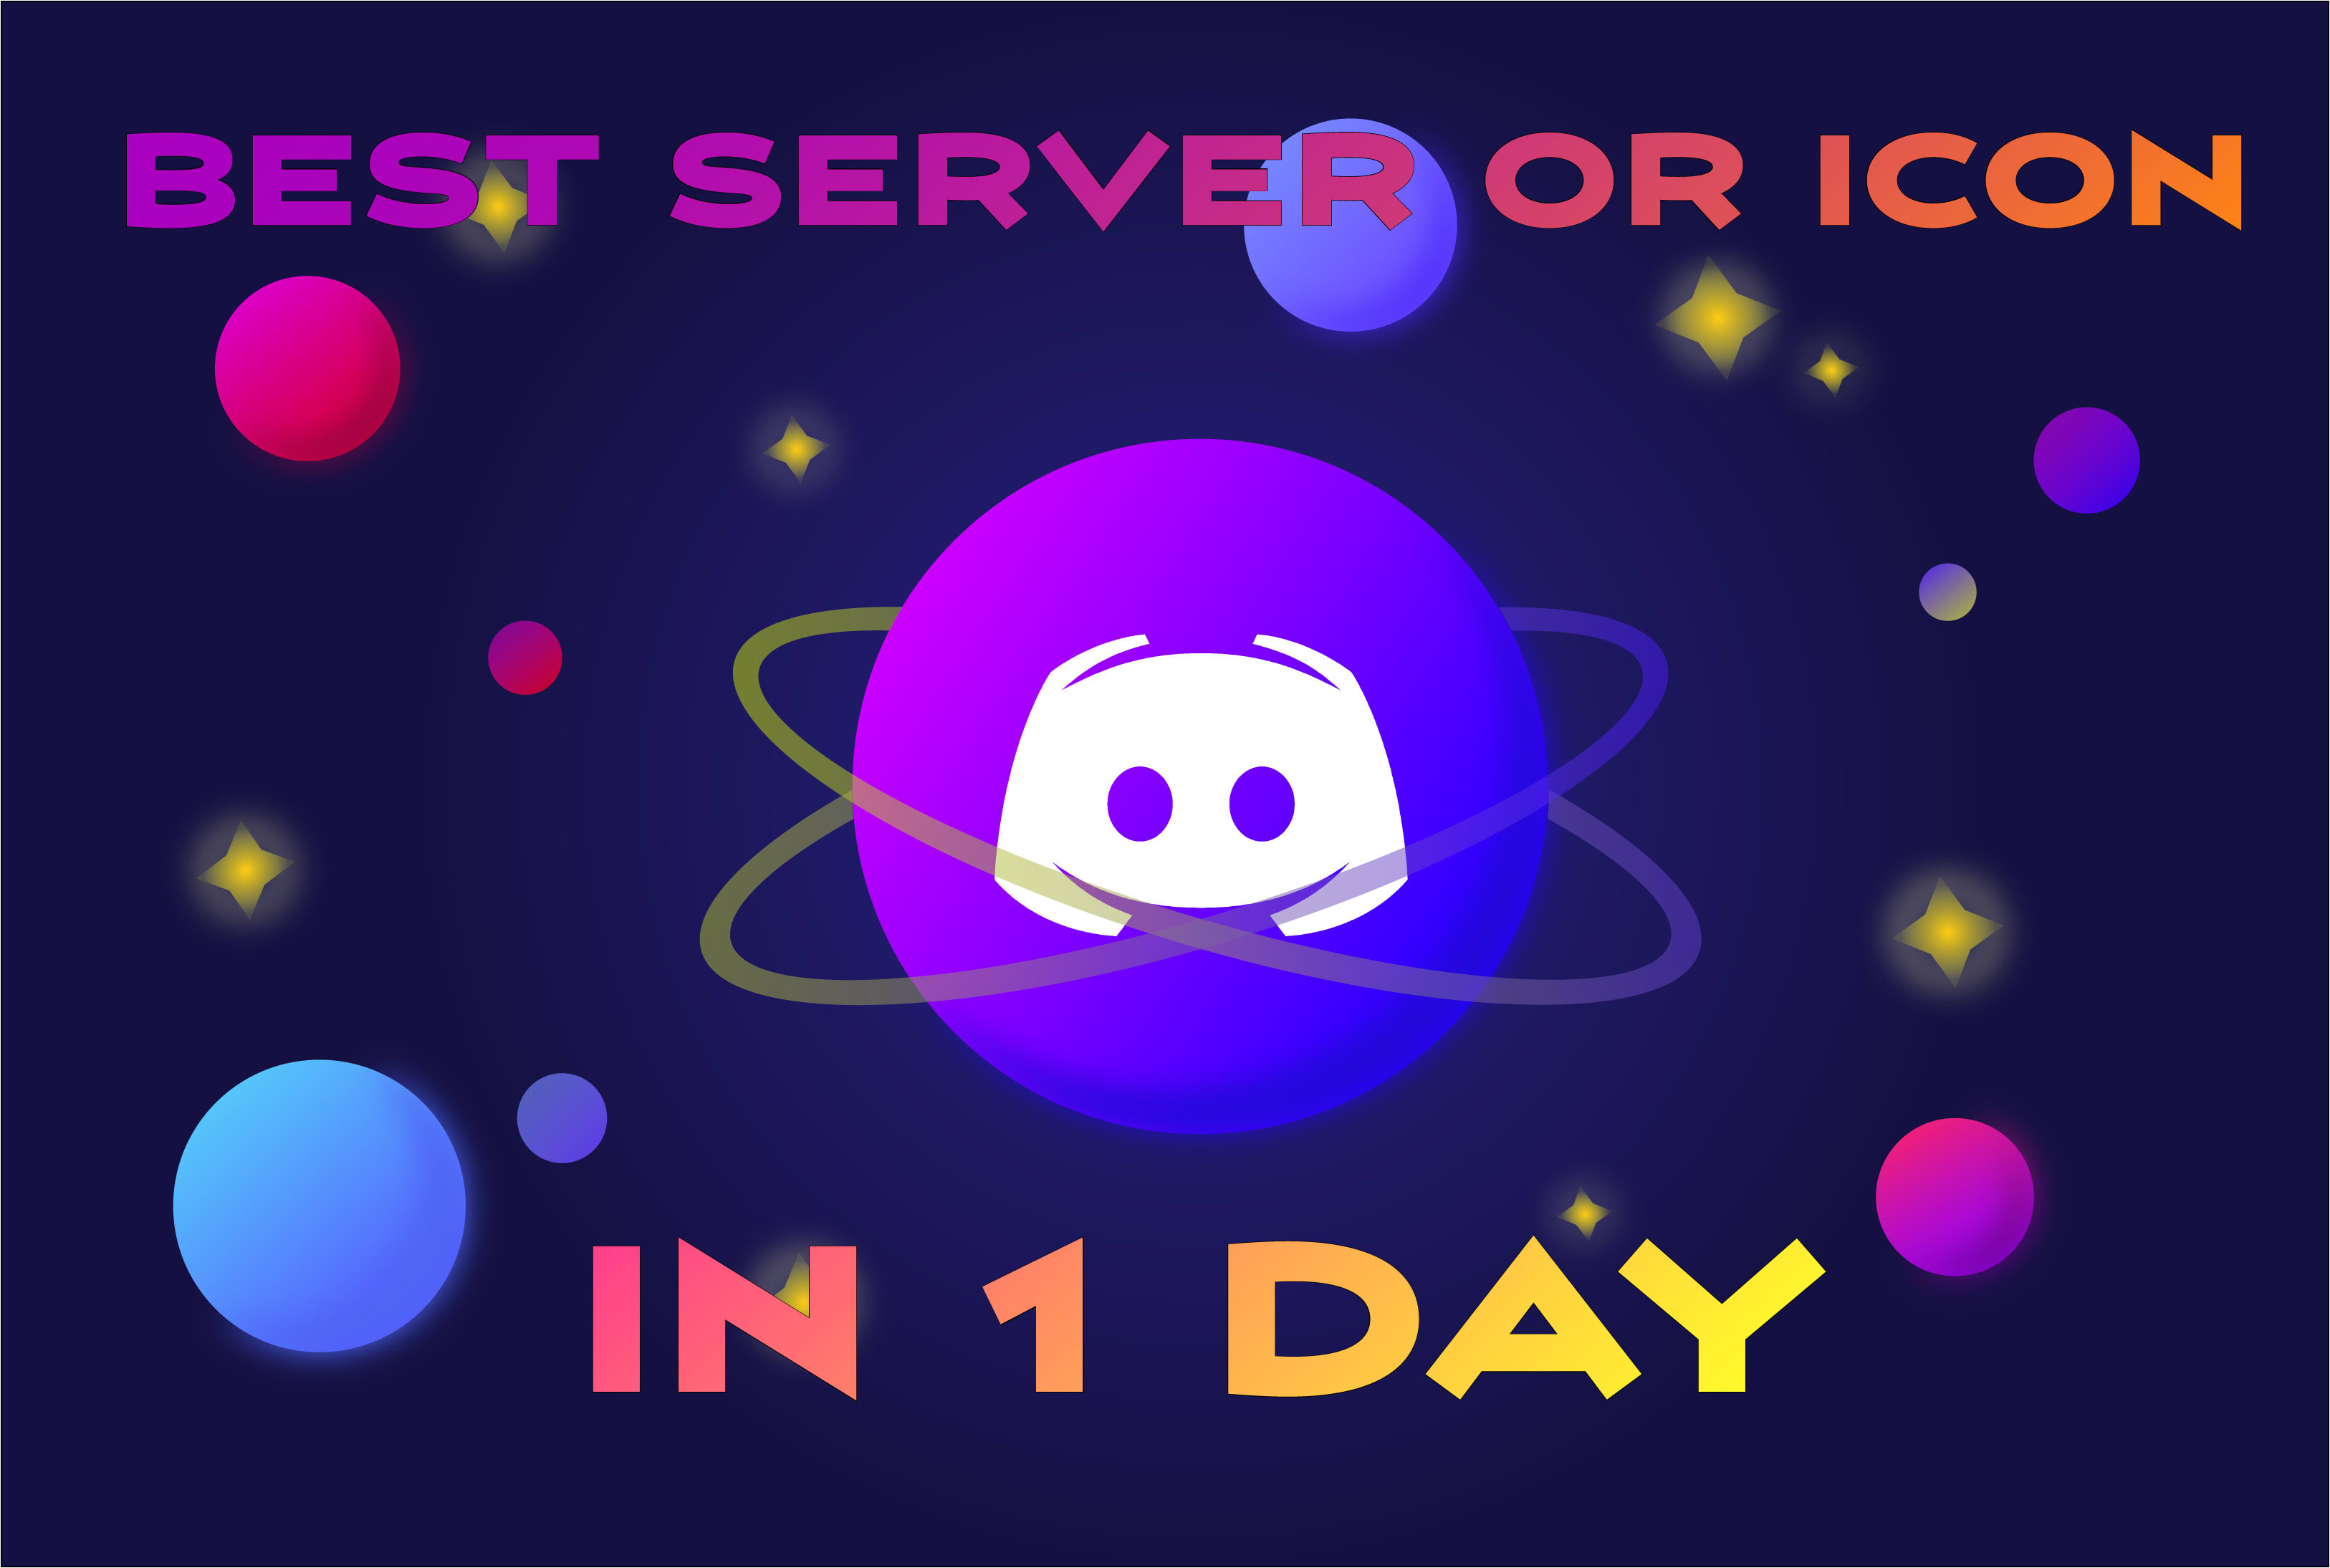 Create The Best Discord Server Or Icon For You By Chairene - 9 resumes best roblox gfx maker discord